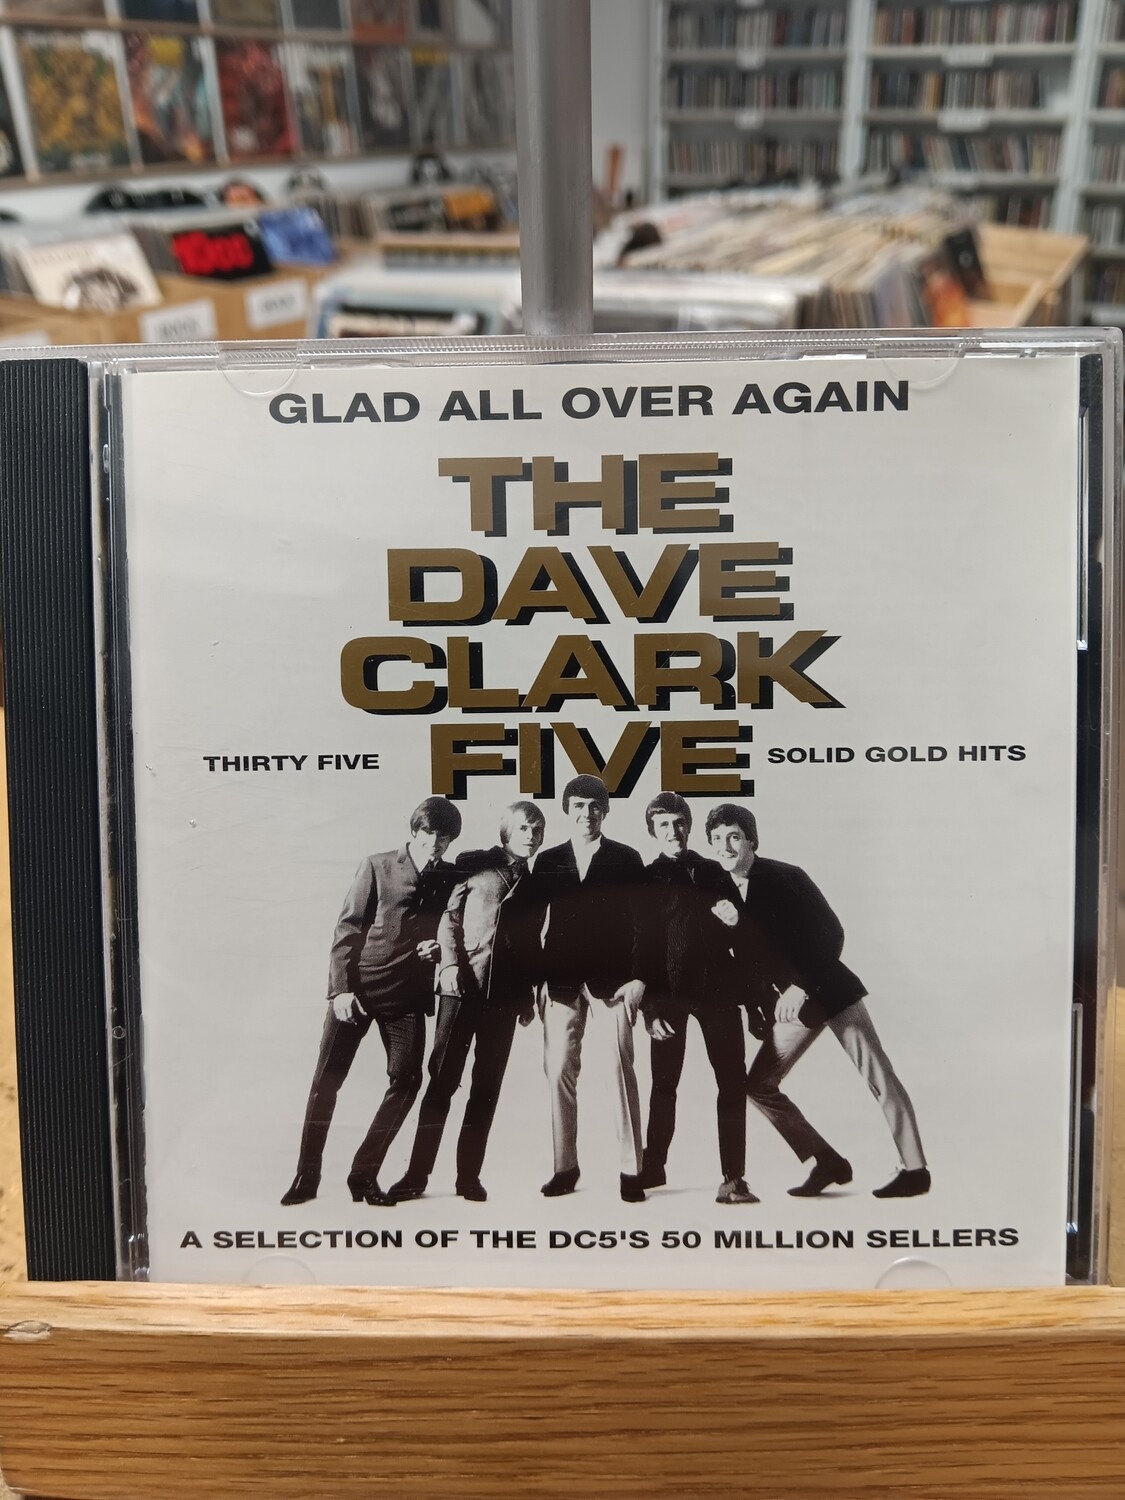 THE DAVE CLARK FIVE - Glad all over again (CD)